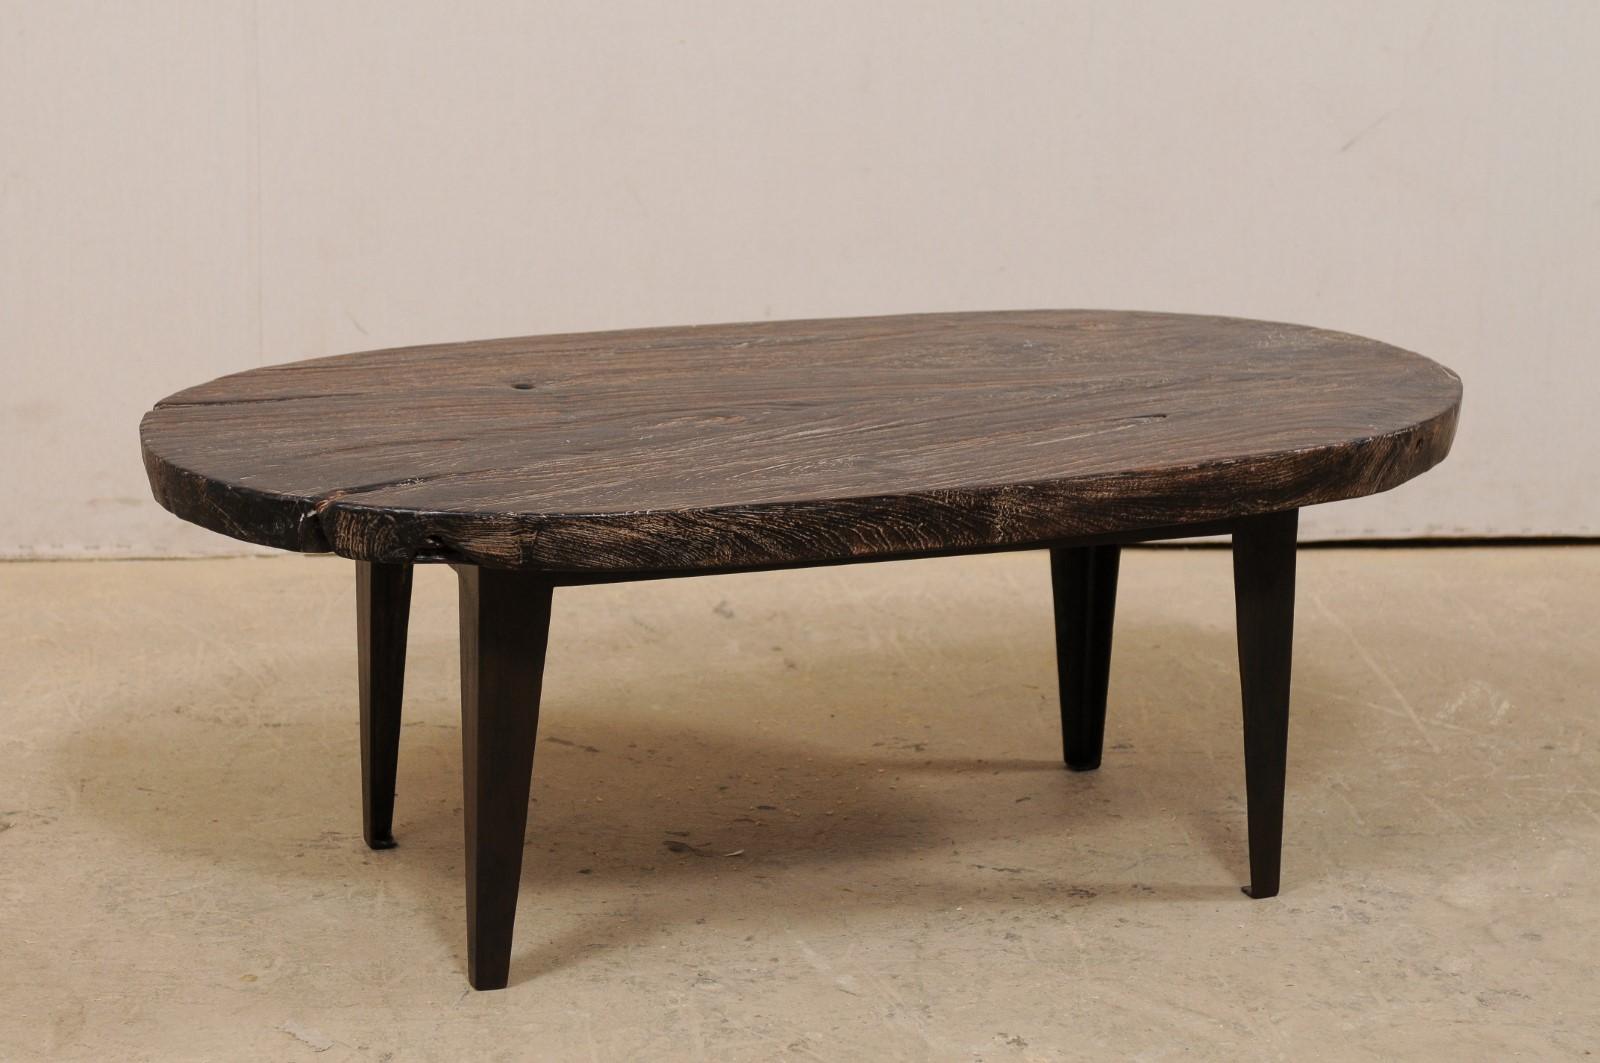 A custom created teak wood top coffee table with iron base. This rustic yet chic coffee table has been fashioned from an oval-shaped piece of teak wood slab, which has been presented upon four custom iron legs. The wood has been carbonized, which is